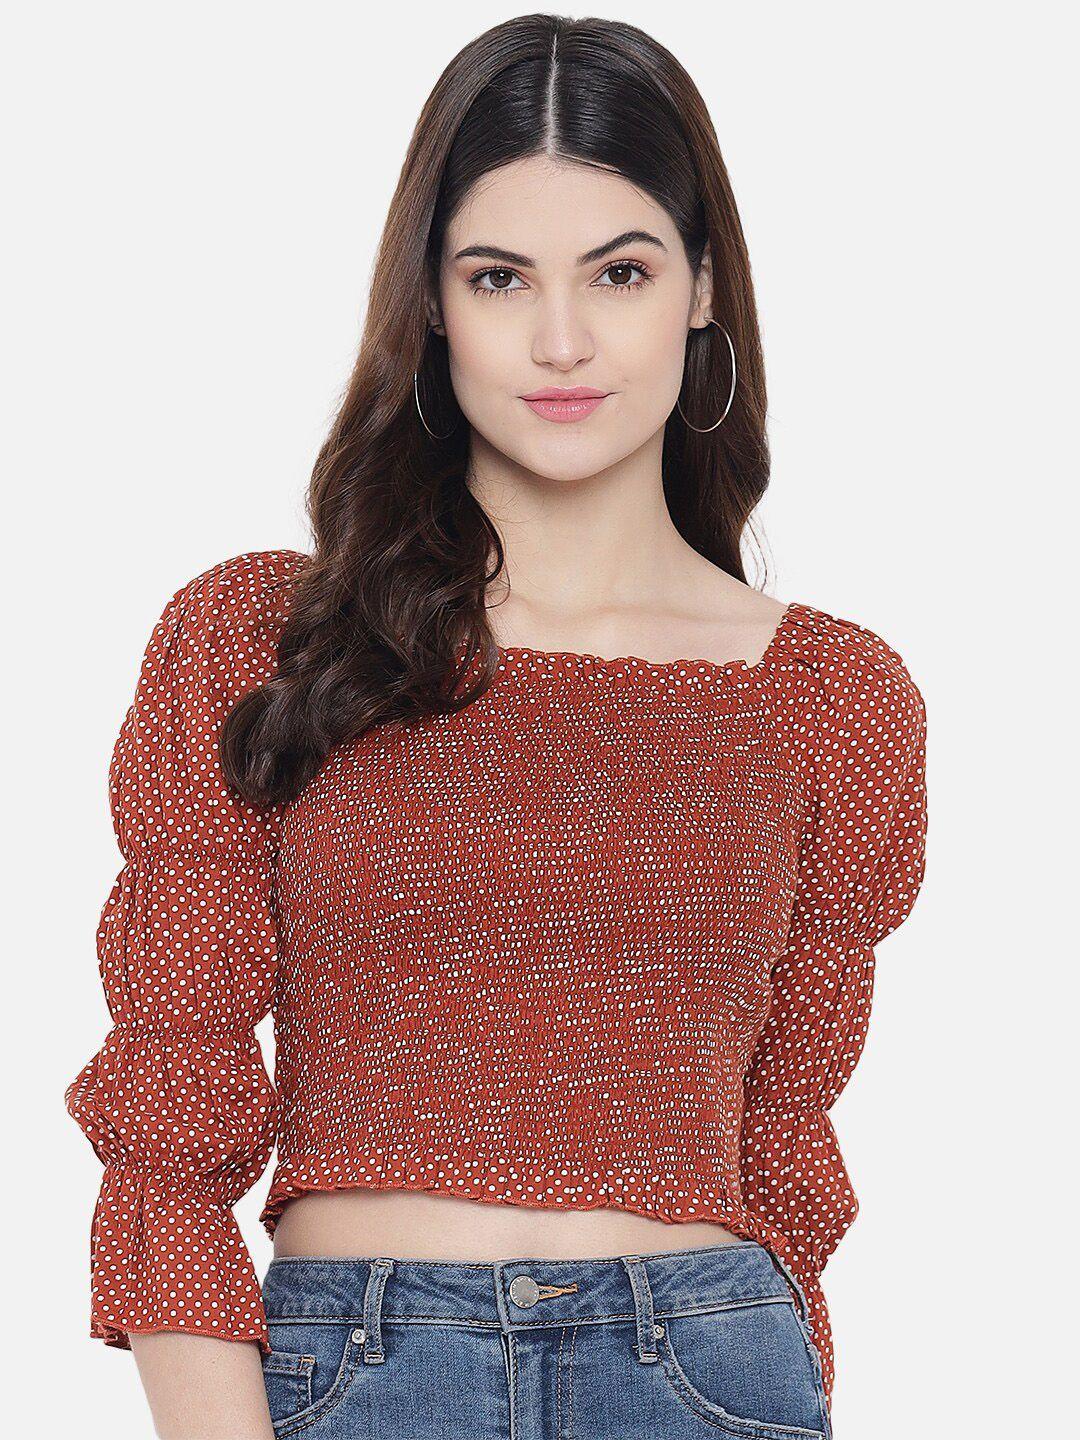 trend arrest polka dots printed smocked fitted crop top